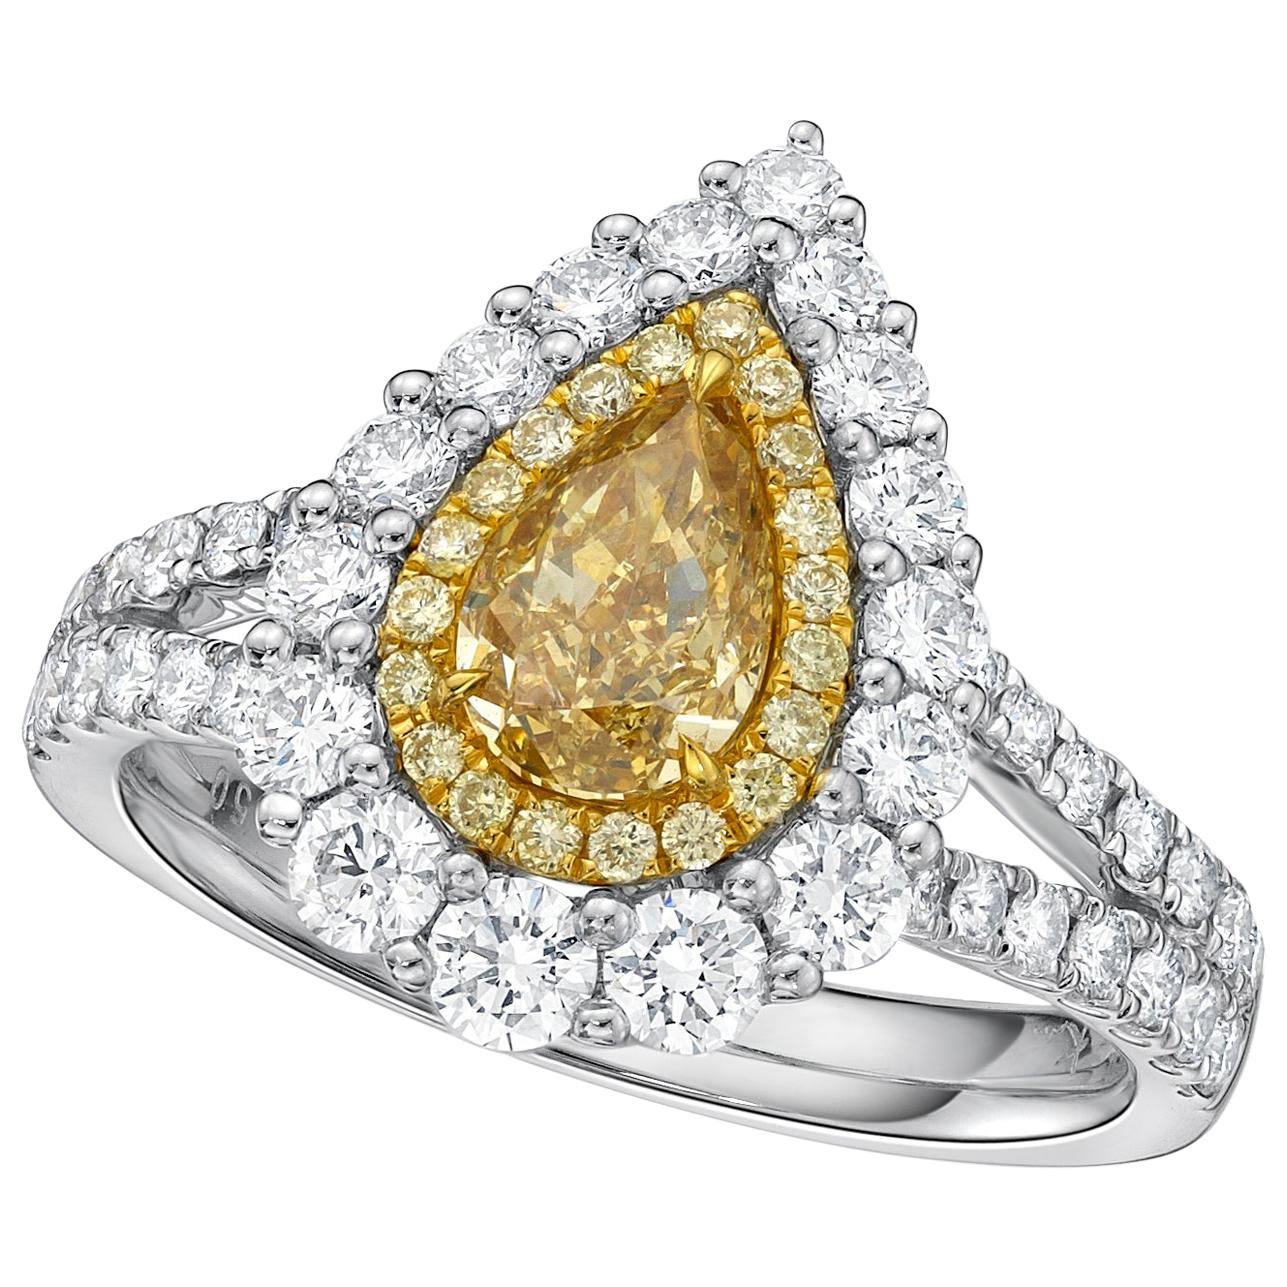 White Gold GIA Certified 1.01 Carat Fancy Brownish Yellow Diamond Ring For Sale